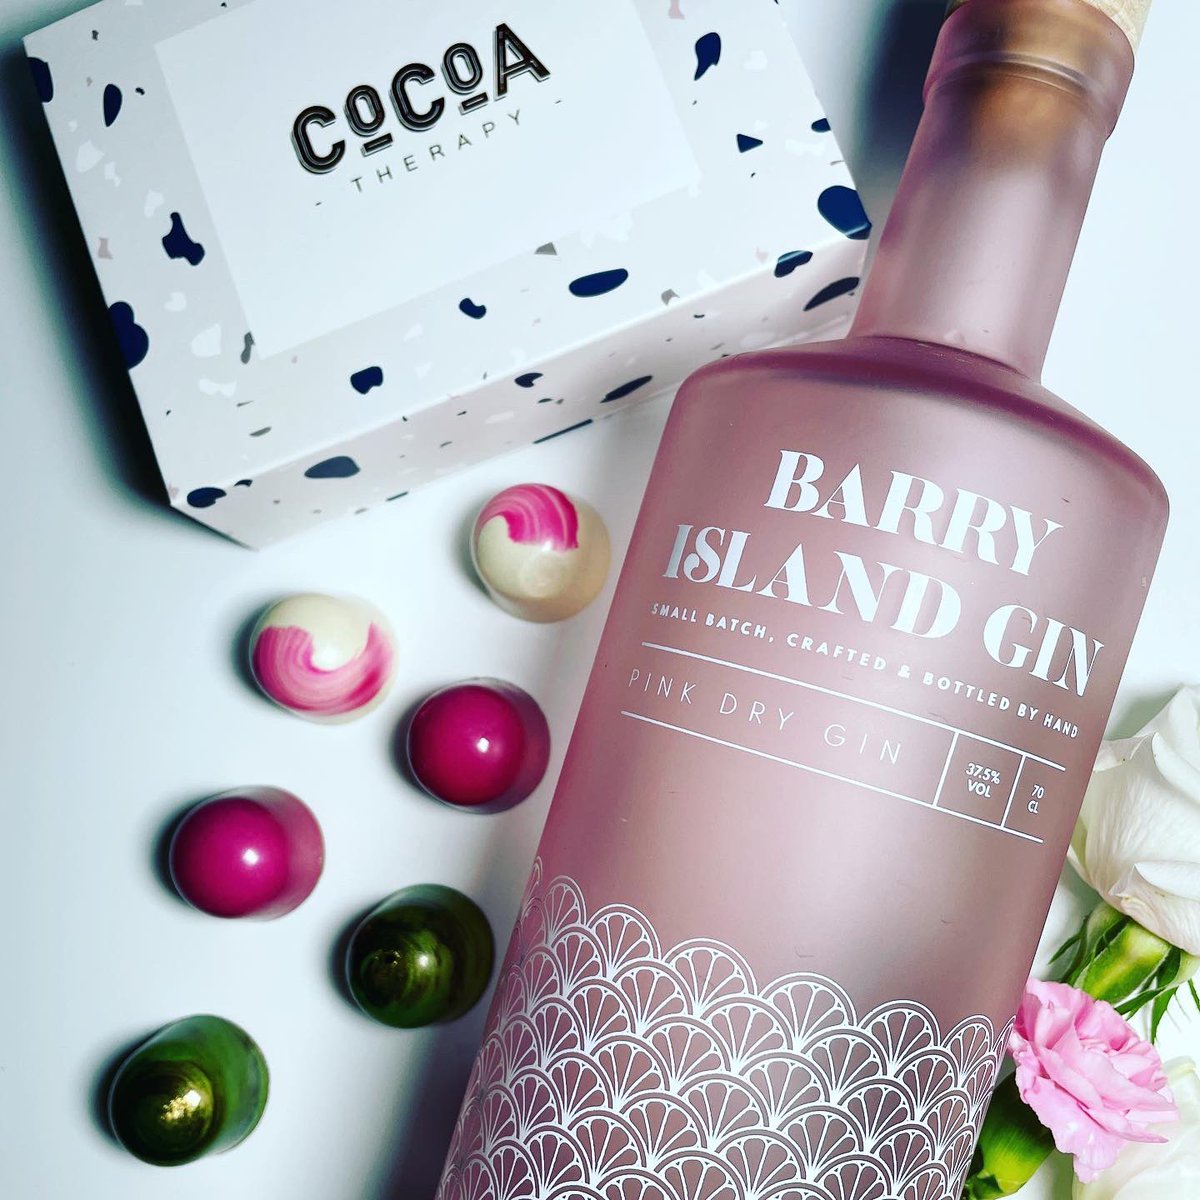 We’re so excited about our latest collab with @TherapyCocoa. Our limited edition Cocoa Therapy x Barry Island Spirits hampers are available to preorder online now for collection next week in time for Mother’s Day. Check out our range of gifts at wearecraftrepublic.co.uk/hamper-gifts